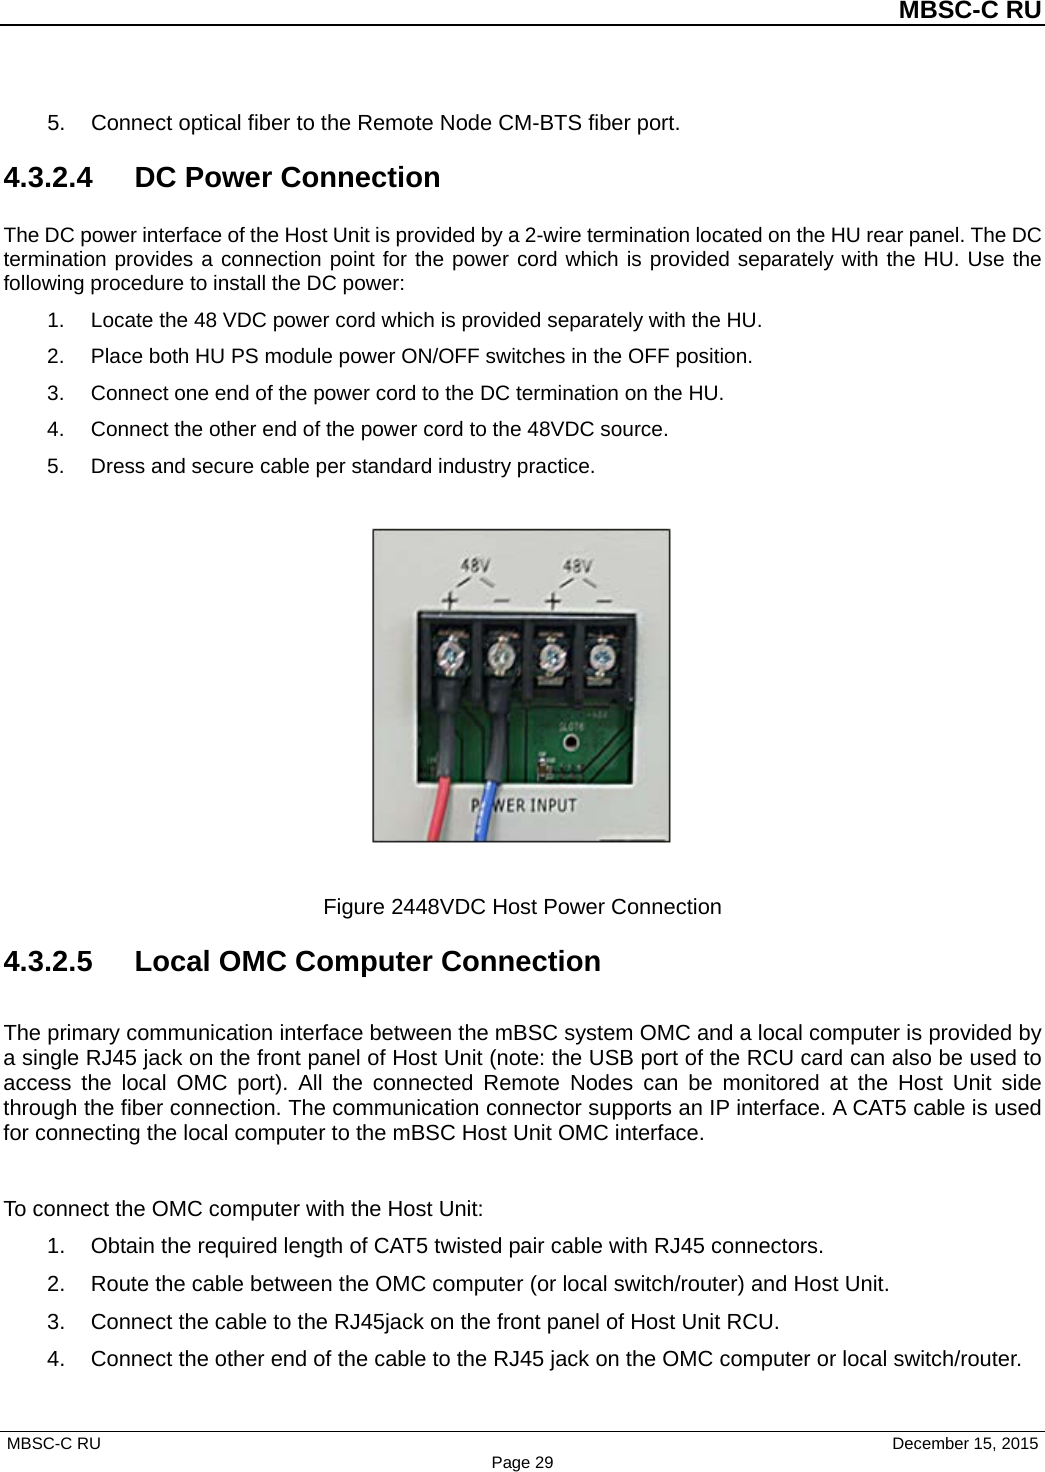          MBSC-C RU   MBSC-C RU                                     December 15, 2015 Page 29 5. Connect optical fiber to the Remote Node CM-BTS fiber port. 4.3.2.4  DC Power Connection The DC power interface of the Host Unit is provided by a 2-wire termination located on the HU rear panel. The DC termination provides a connection point for the power cord which is provided separately with the HU. Use the following procedure to install the DC power: 1. Locate the 48 VDC power cord which is provided separately with the HU.   2. Place both HU PS module power ON/OFF switches in the OFF position. 3. Connect one end of the power cord to the DC termination on the HU. 4. Connect the other end of the power cord to the 48VDC source. 5. Dress and secure cable per standard industry practice.    Figure 2448VDC Host Power Connection 4.3.2.5 Local OMC Computer Connection The primary communication interface between the mBSC system OMC and a local computer is provided by a single RJ45 jack on the front panel of Host Unit (note: the USB port of the RCU card can also be used to access the local OMC port). All the connected Remote Nodes can be monitored at the Host Unit side through the fiber connection. The communication connector supports an IP interface. A CAT5 cable is used for connecting the local computer to the mBSC Host Unit OMC interface.  To connect the OMC computer with the Host Unit: 1. Obtain the required length of CAT5 twisted pair cable with RJ45 connectors. 2. Route the cable between the OMC computer (or local switch/router) and Host Unit. 3. Connect the cable to the RJ45jack on the front panel of Host Unit RCU. 4. Connect the other end of the cable to the RJ45 jack on the OMC computer or local switch/router. 